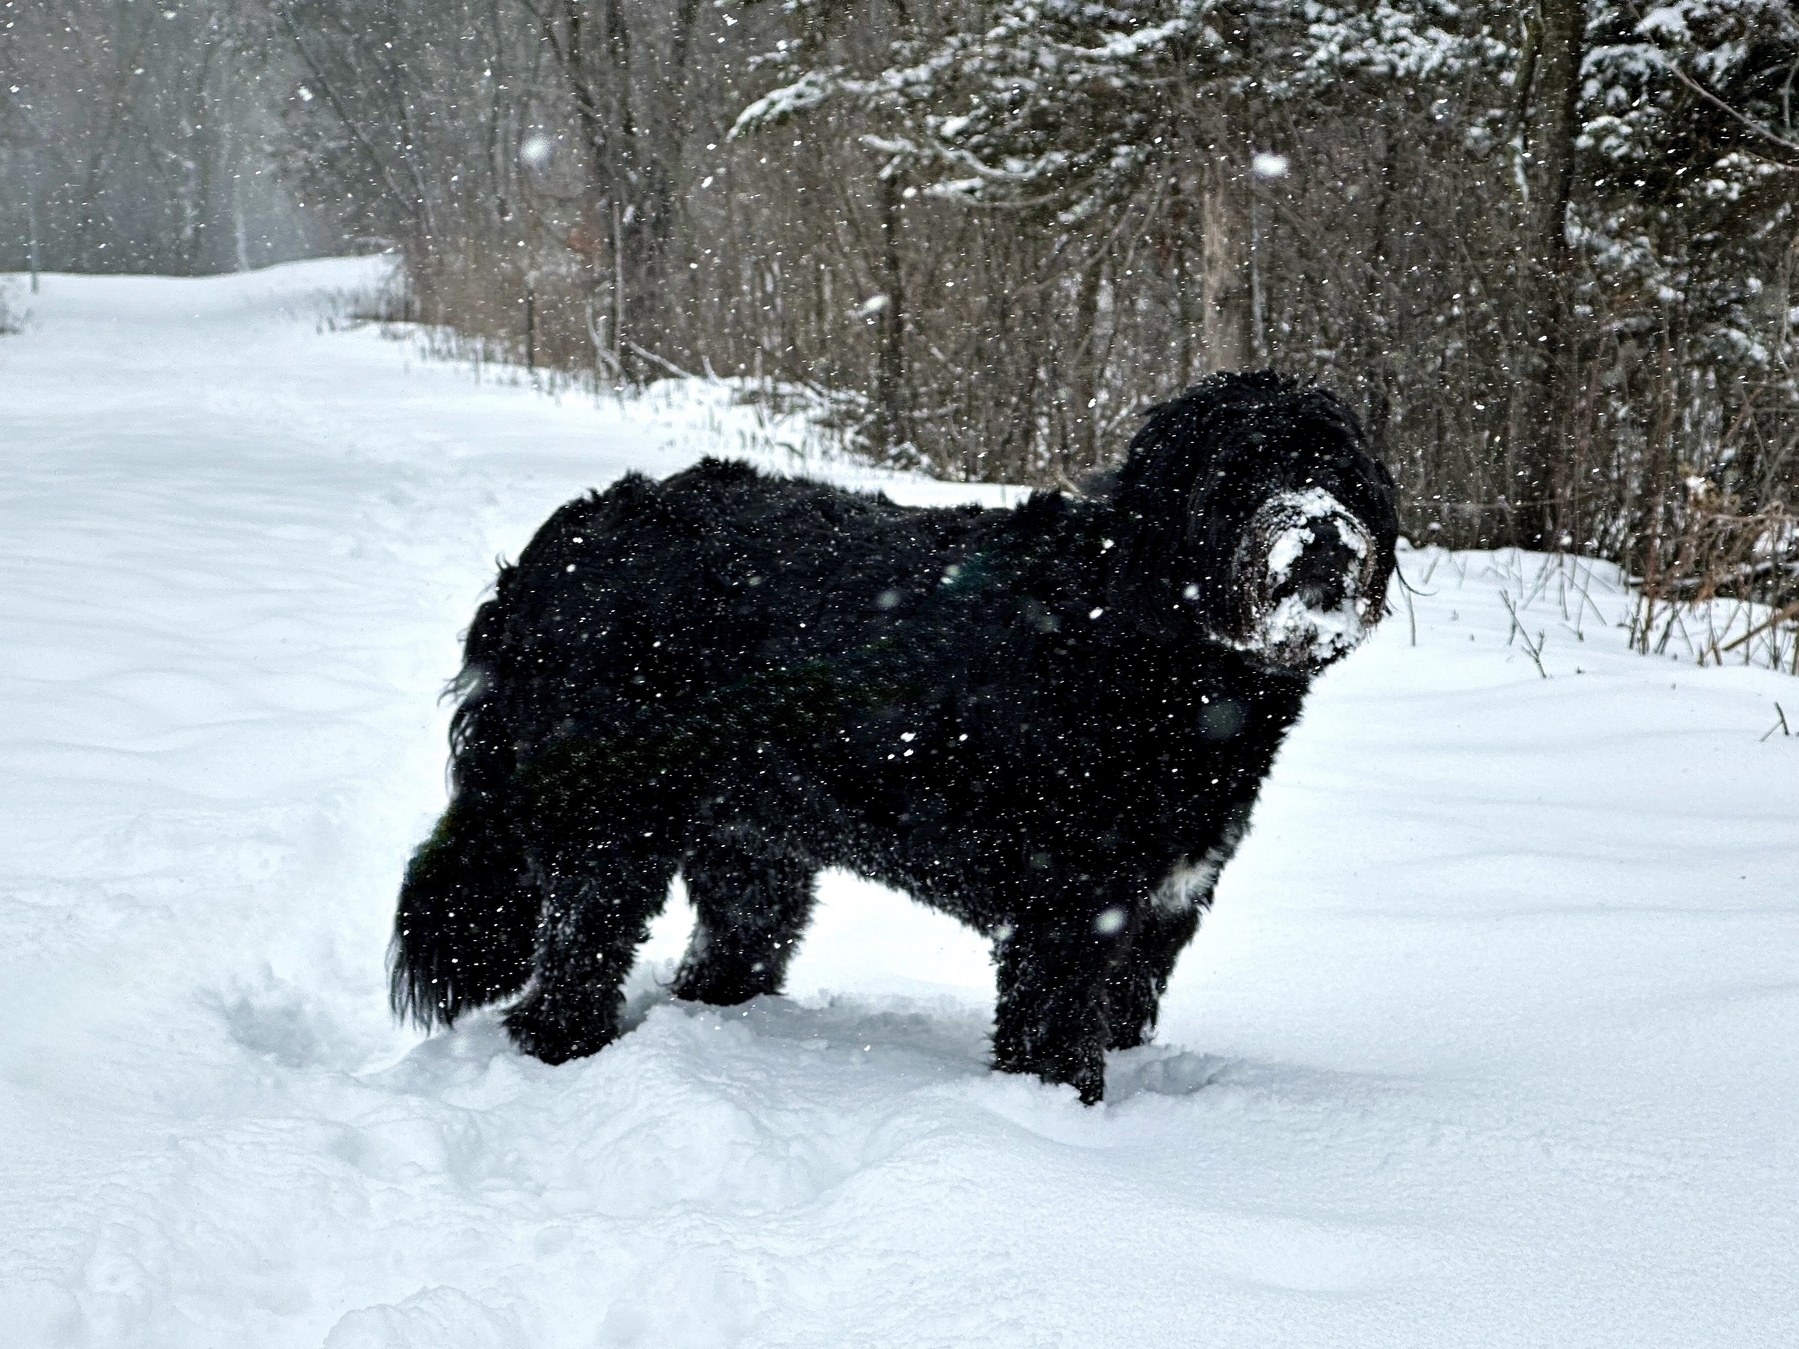 A black dog stands in snow, with light snowfall, surrounded by a forested area. Snowflakes are visible on its fur.